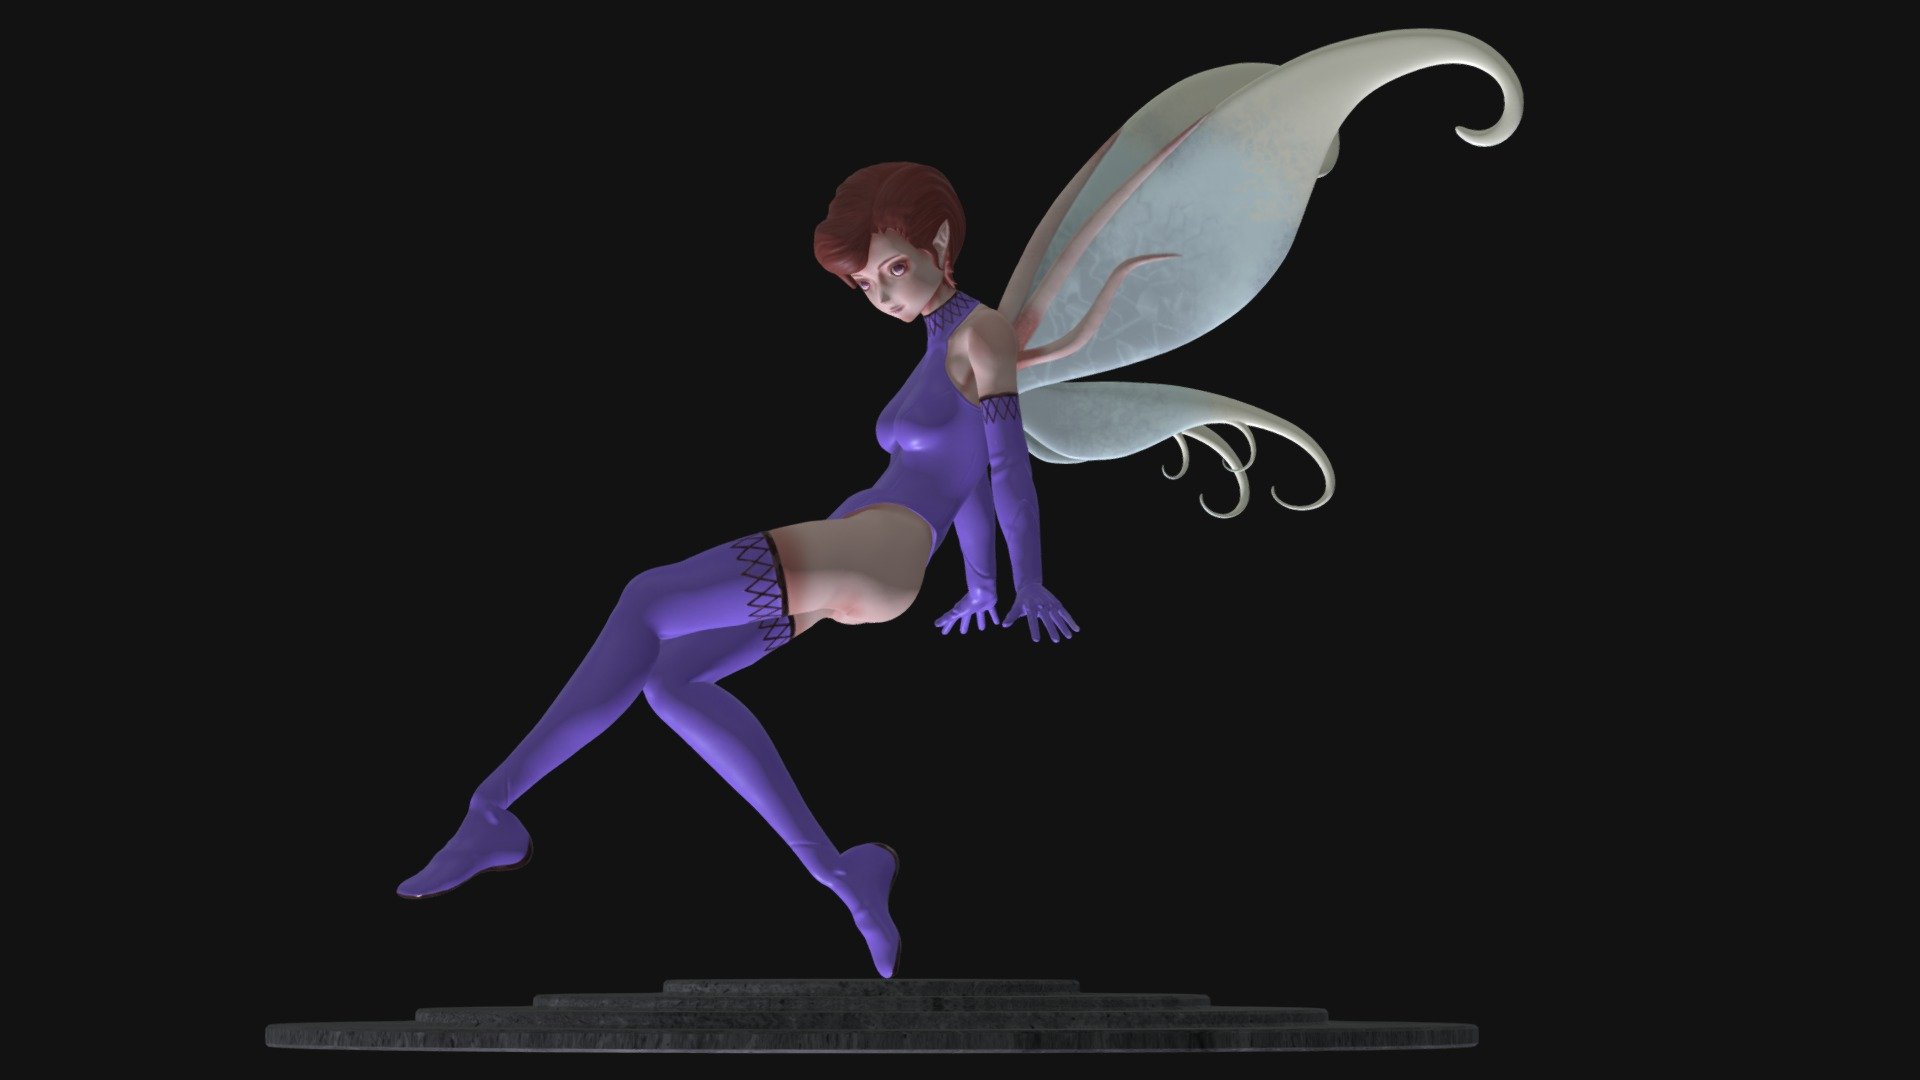 From the Shin Megami Tensei series.
Includes model and skeleton with basic weight painting 3d model